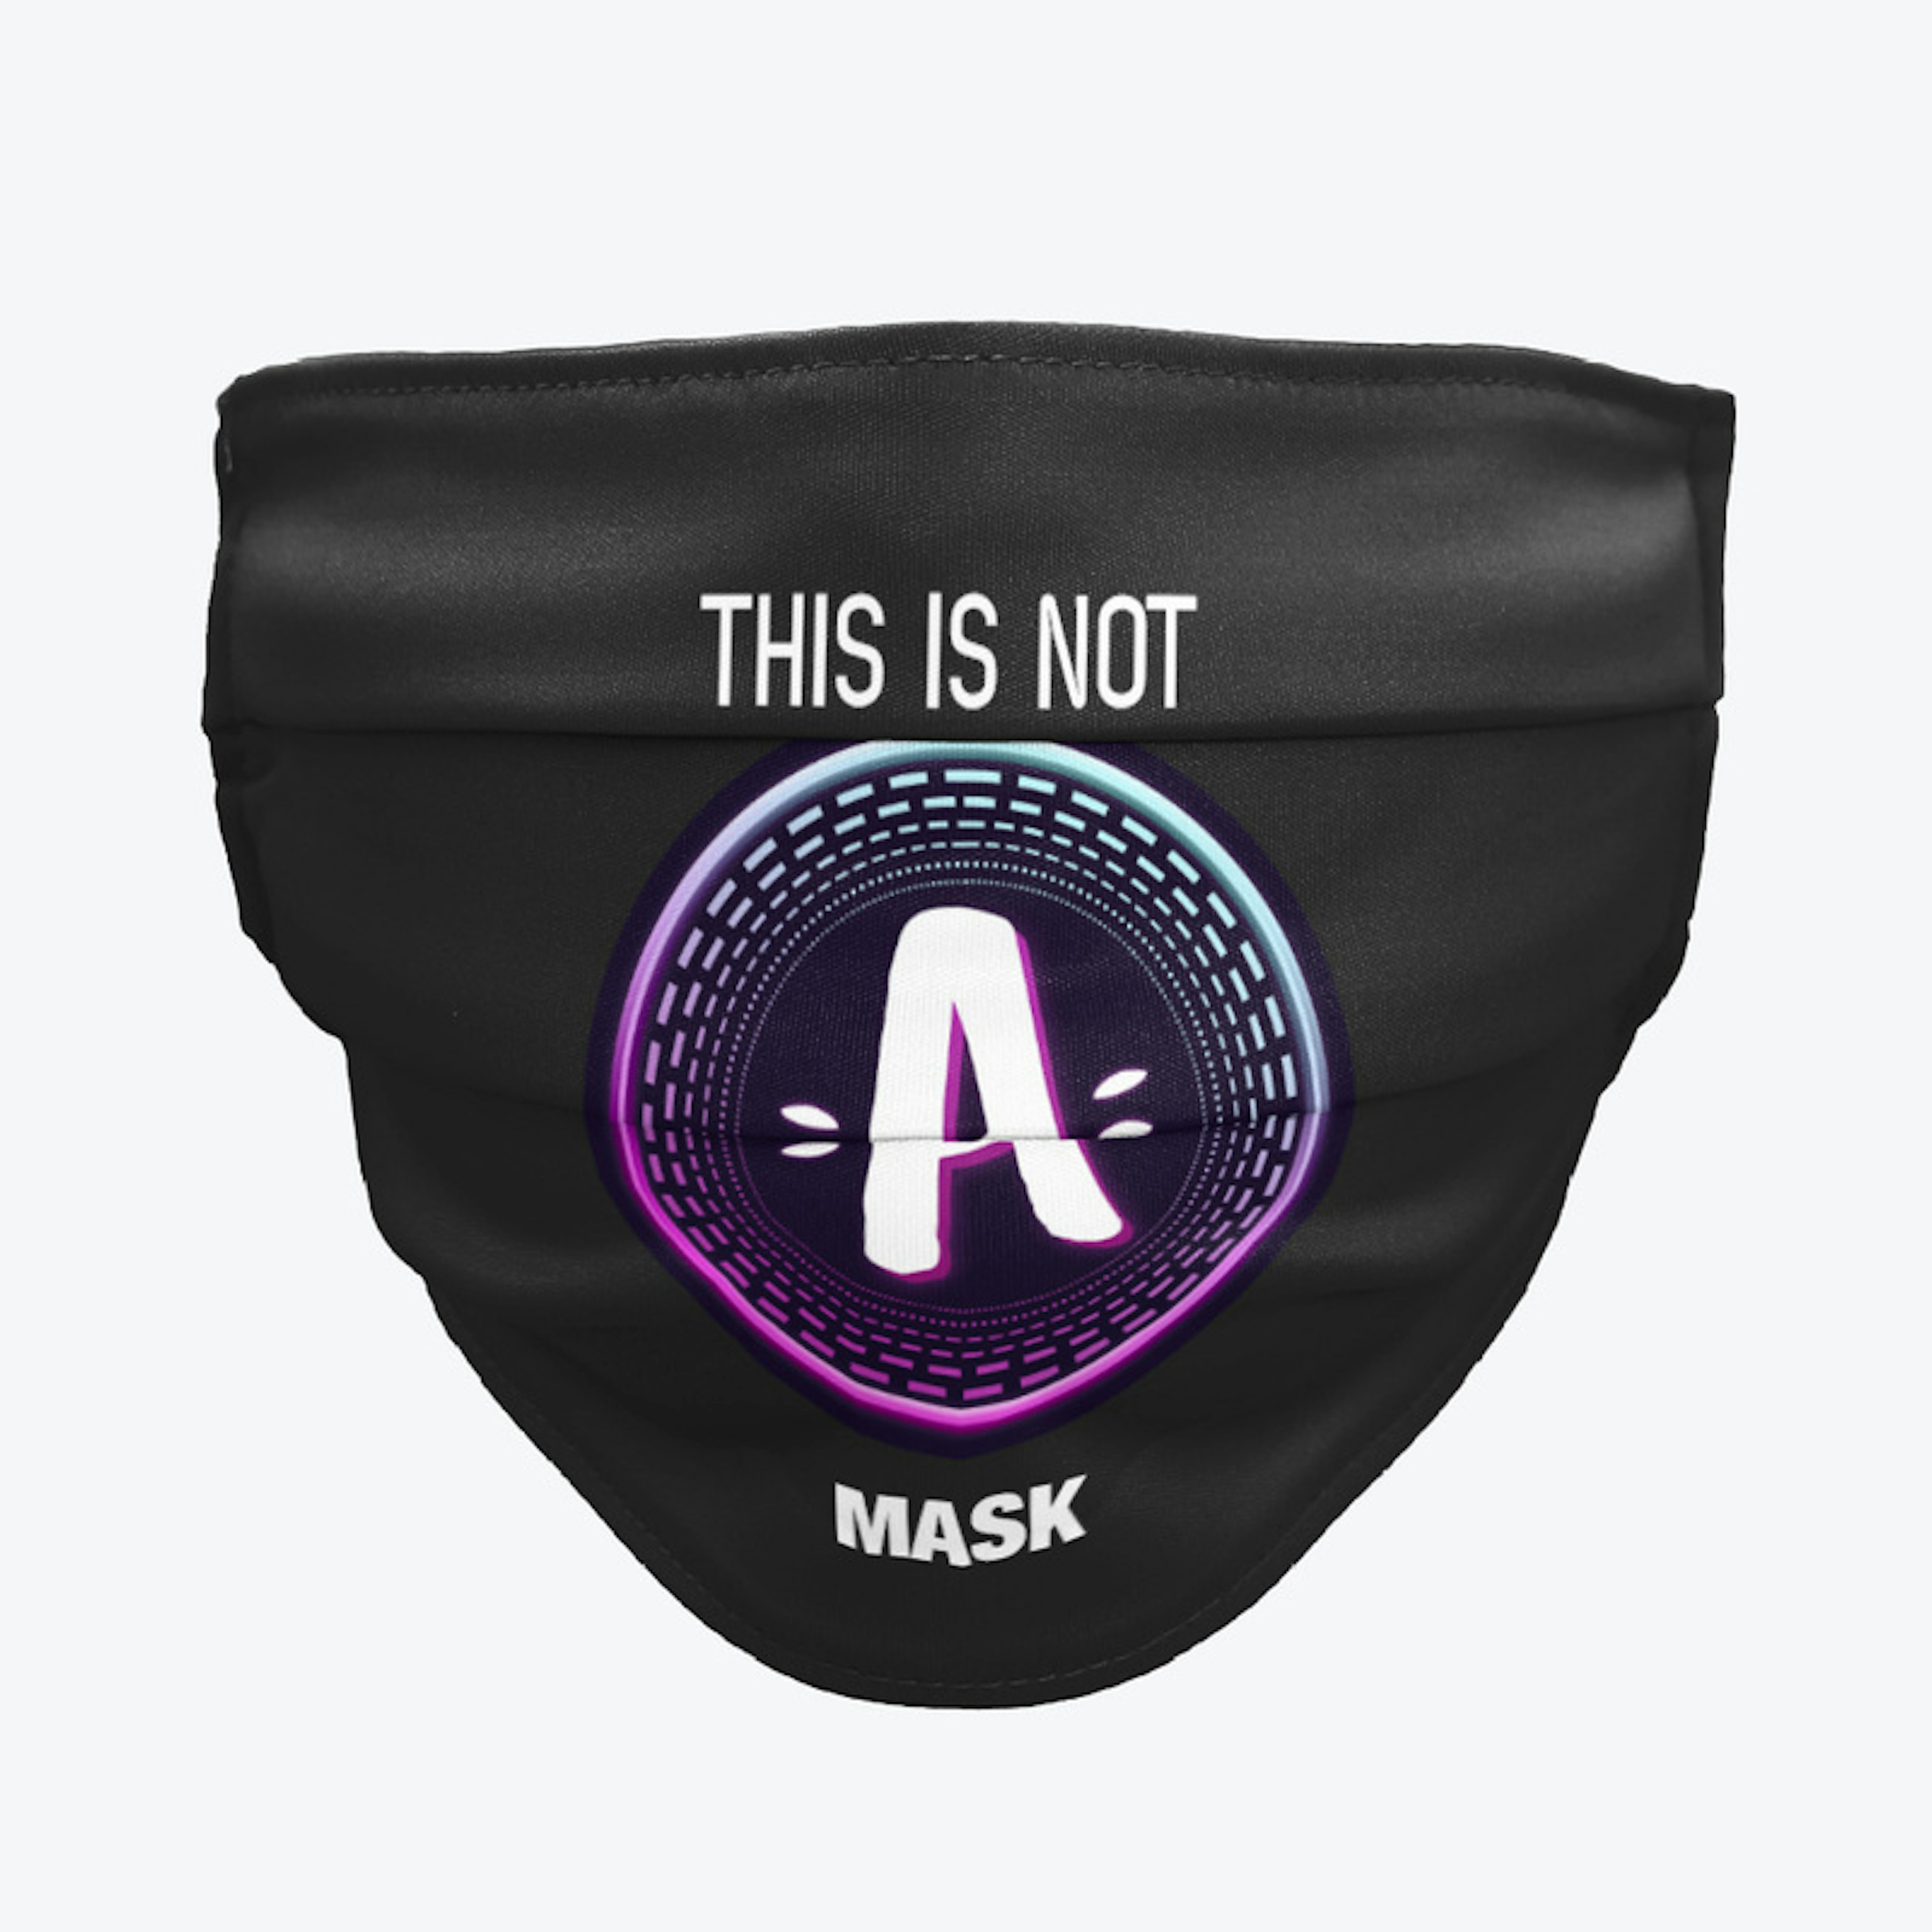 Not A Mask